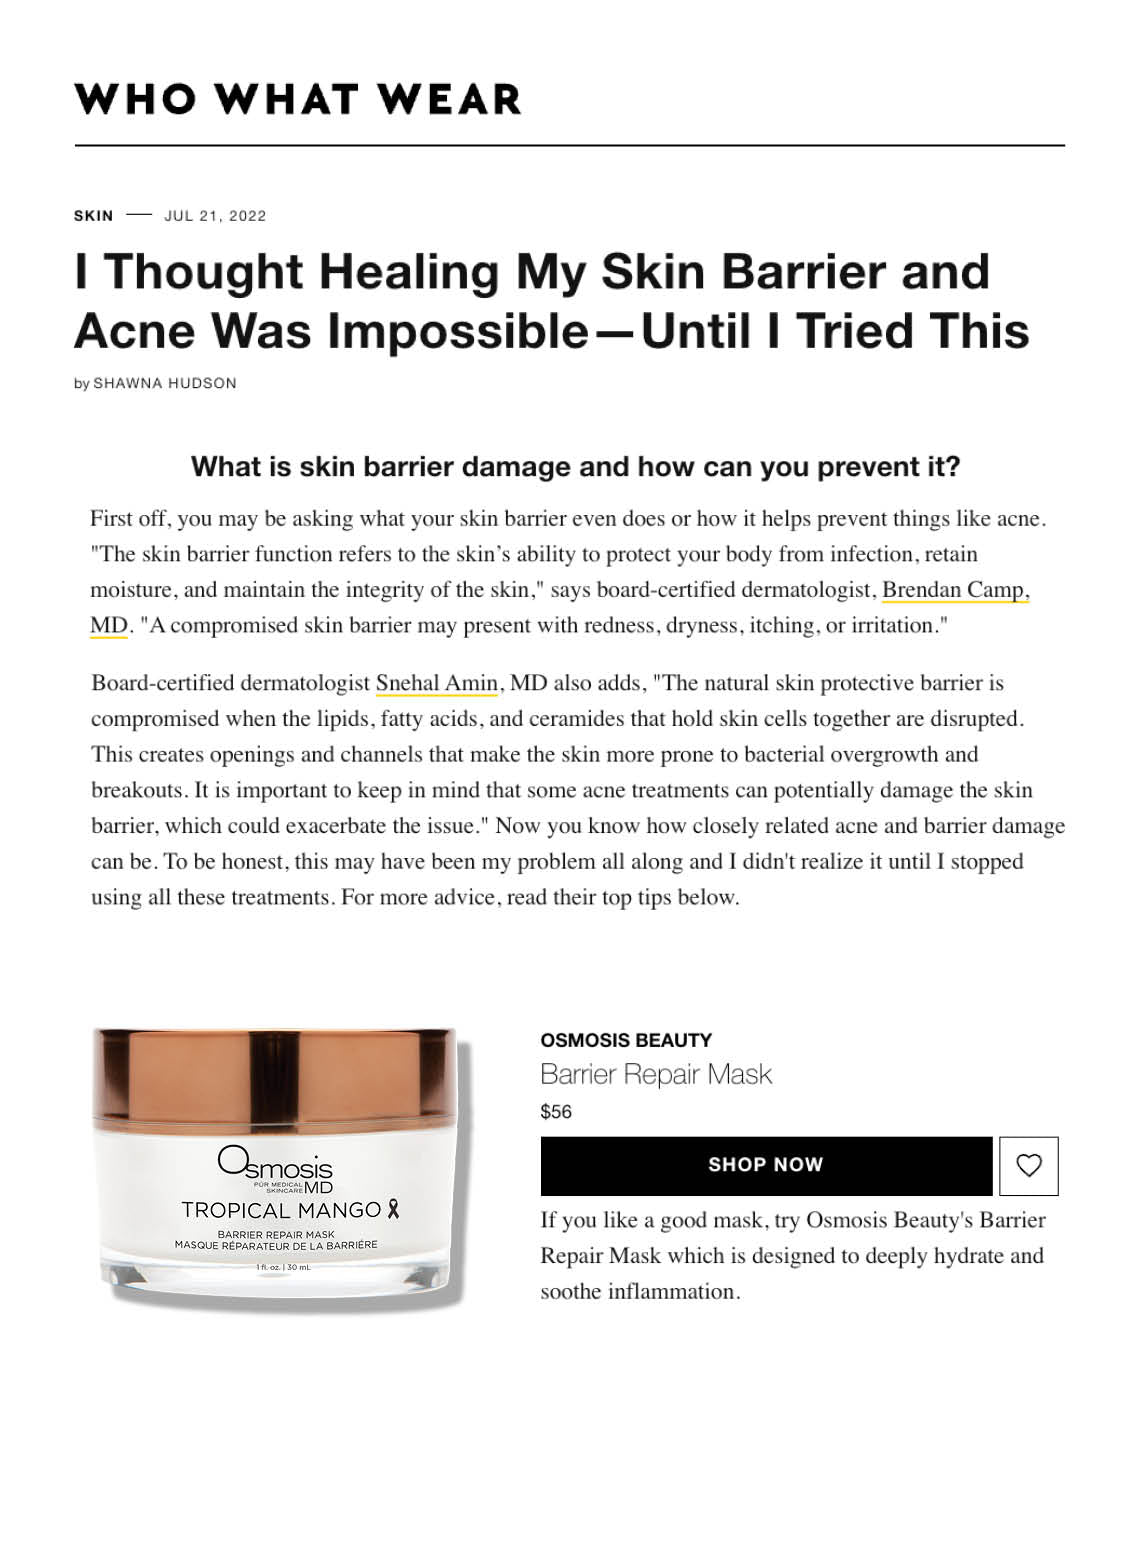 Barrier Repair Mask is featured on Who What Wear in a story titled I Thought Healing My Skin Barrier and Acne Was Impossible—Until I Tried This.